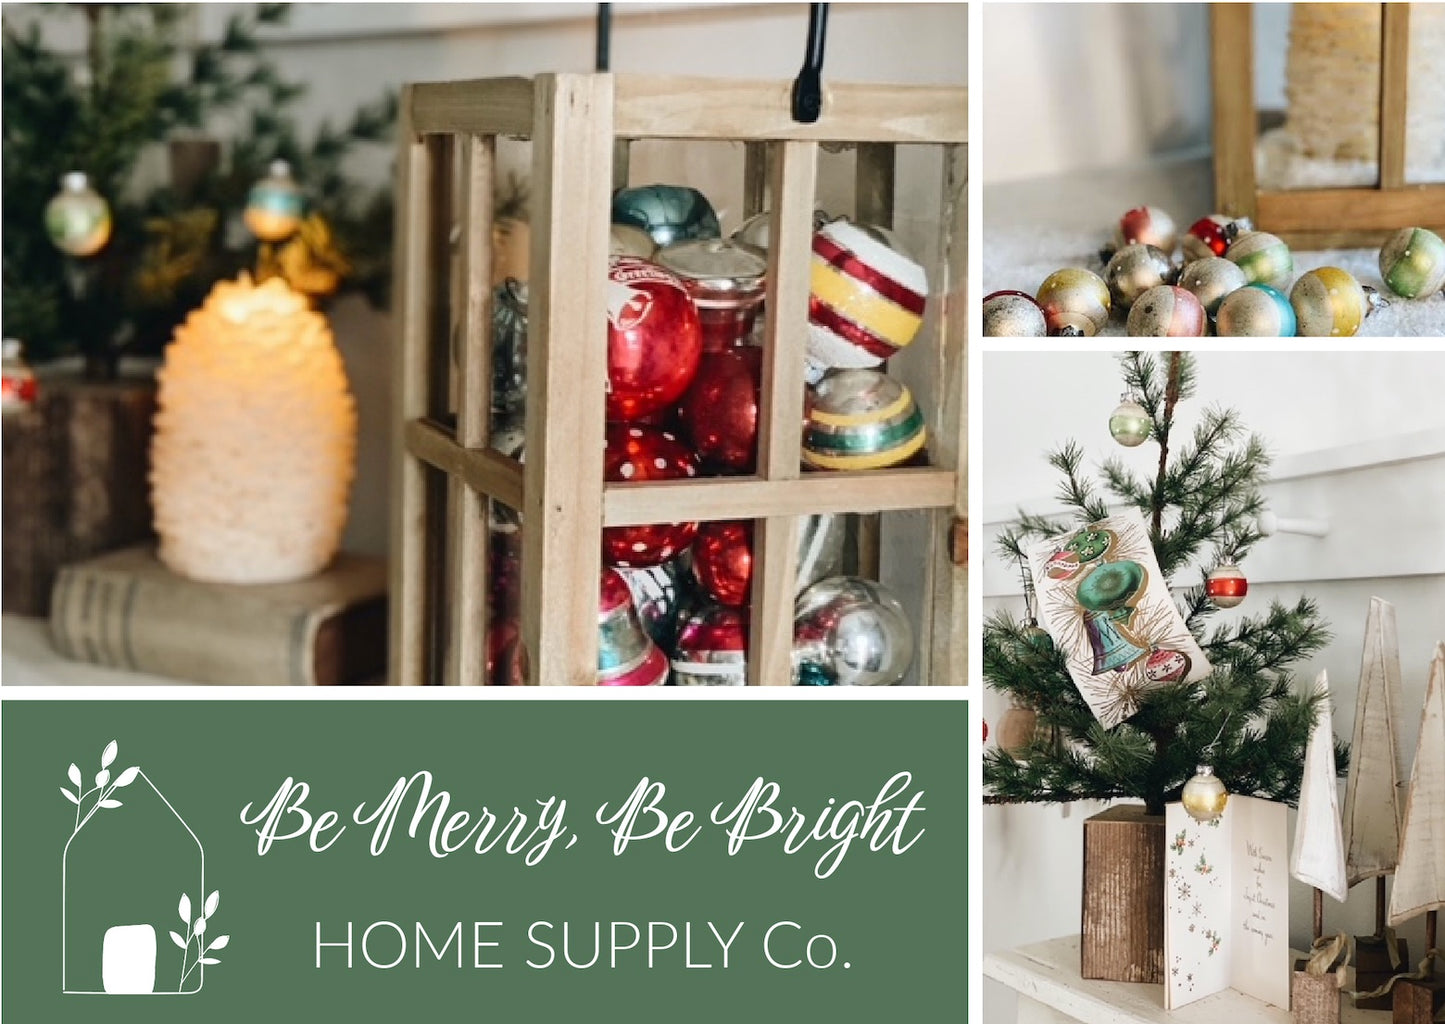 Home Supply Co. Subscription Box- Next Up Summer Box - shipping mid June!